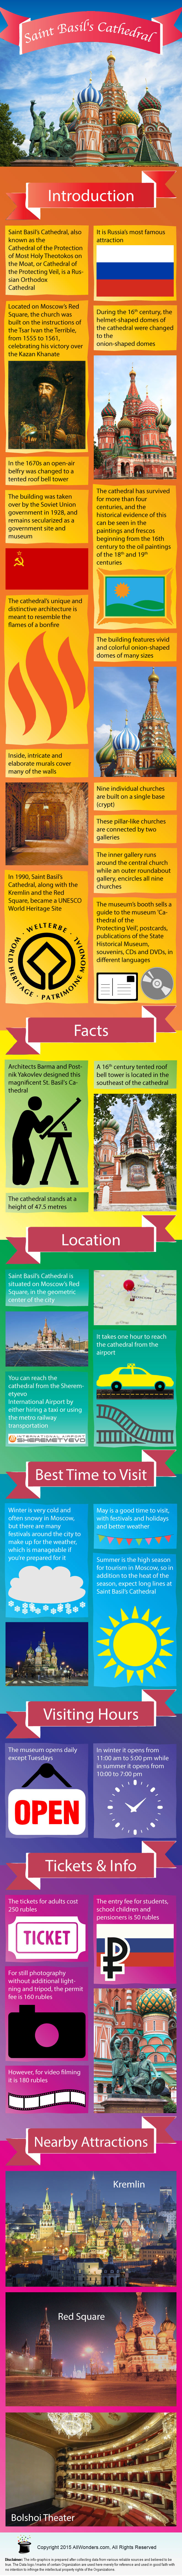 Saint Basil’s Cathedral Infographic